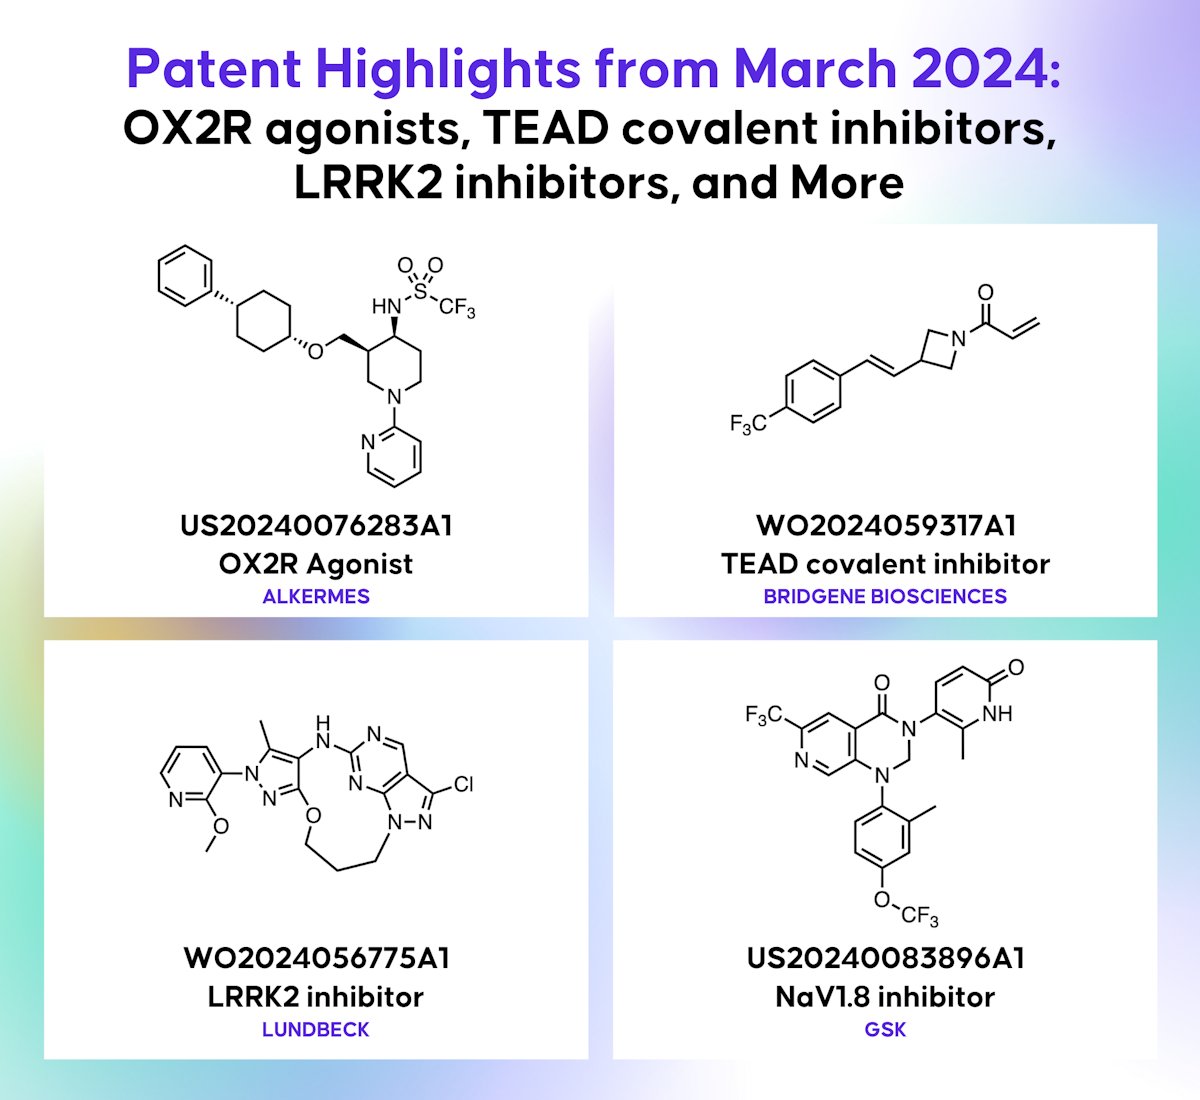 March 2024 Patent Highlights | drughunters.com/3JZWYbH

Our team at Drug Hunter has compiled a annotated, searchable table including information from more than 200 patents from March 2024 of potential interest to drug hunters, along with highlights from some of our favorites.